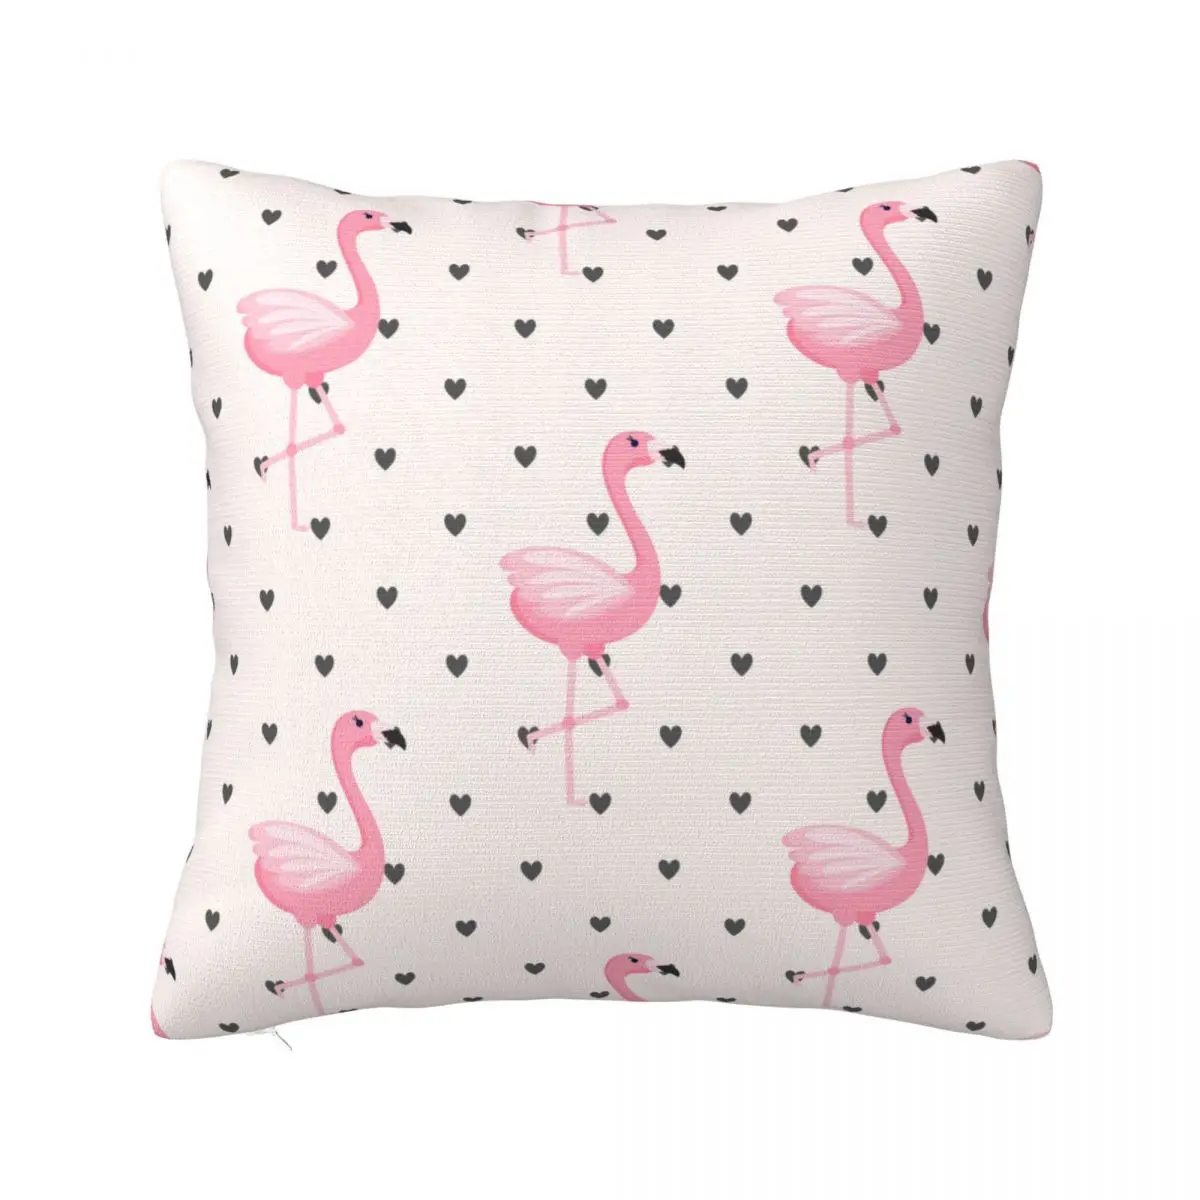 

Pink Flamingo Plaid Pillowcase Printed Polyester Cushion Cover Decor Cartoon Animal Pillow Case Cover Seater Square 40X40cm